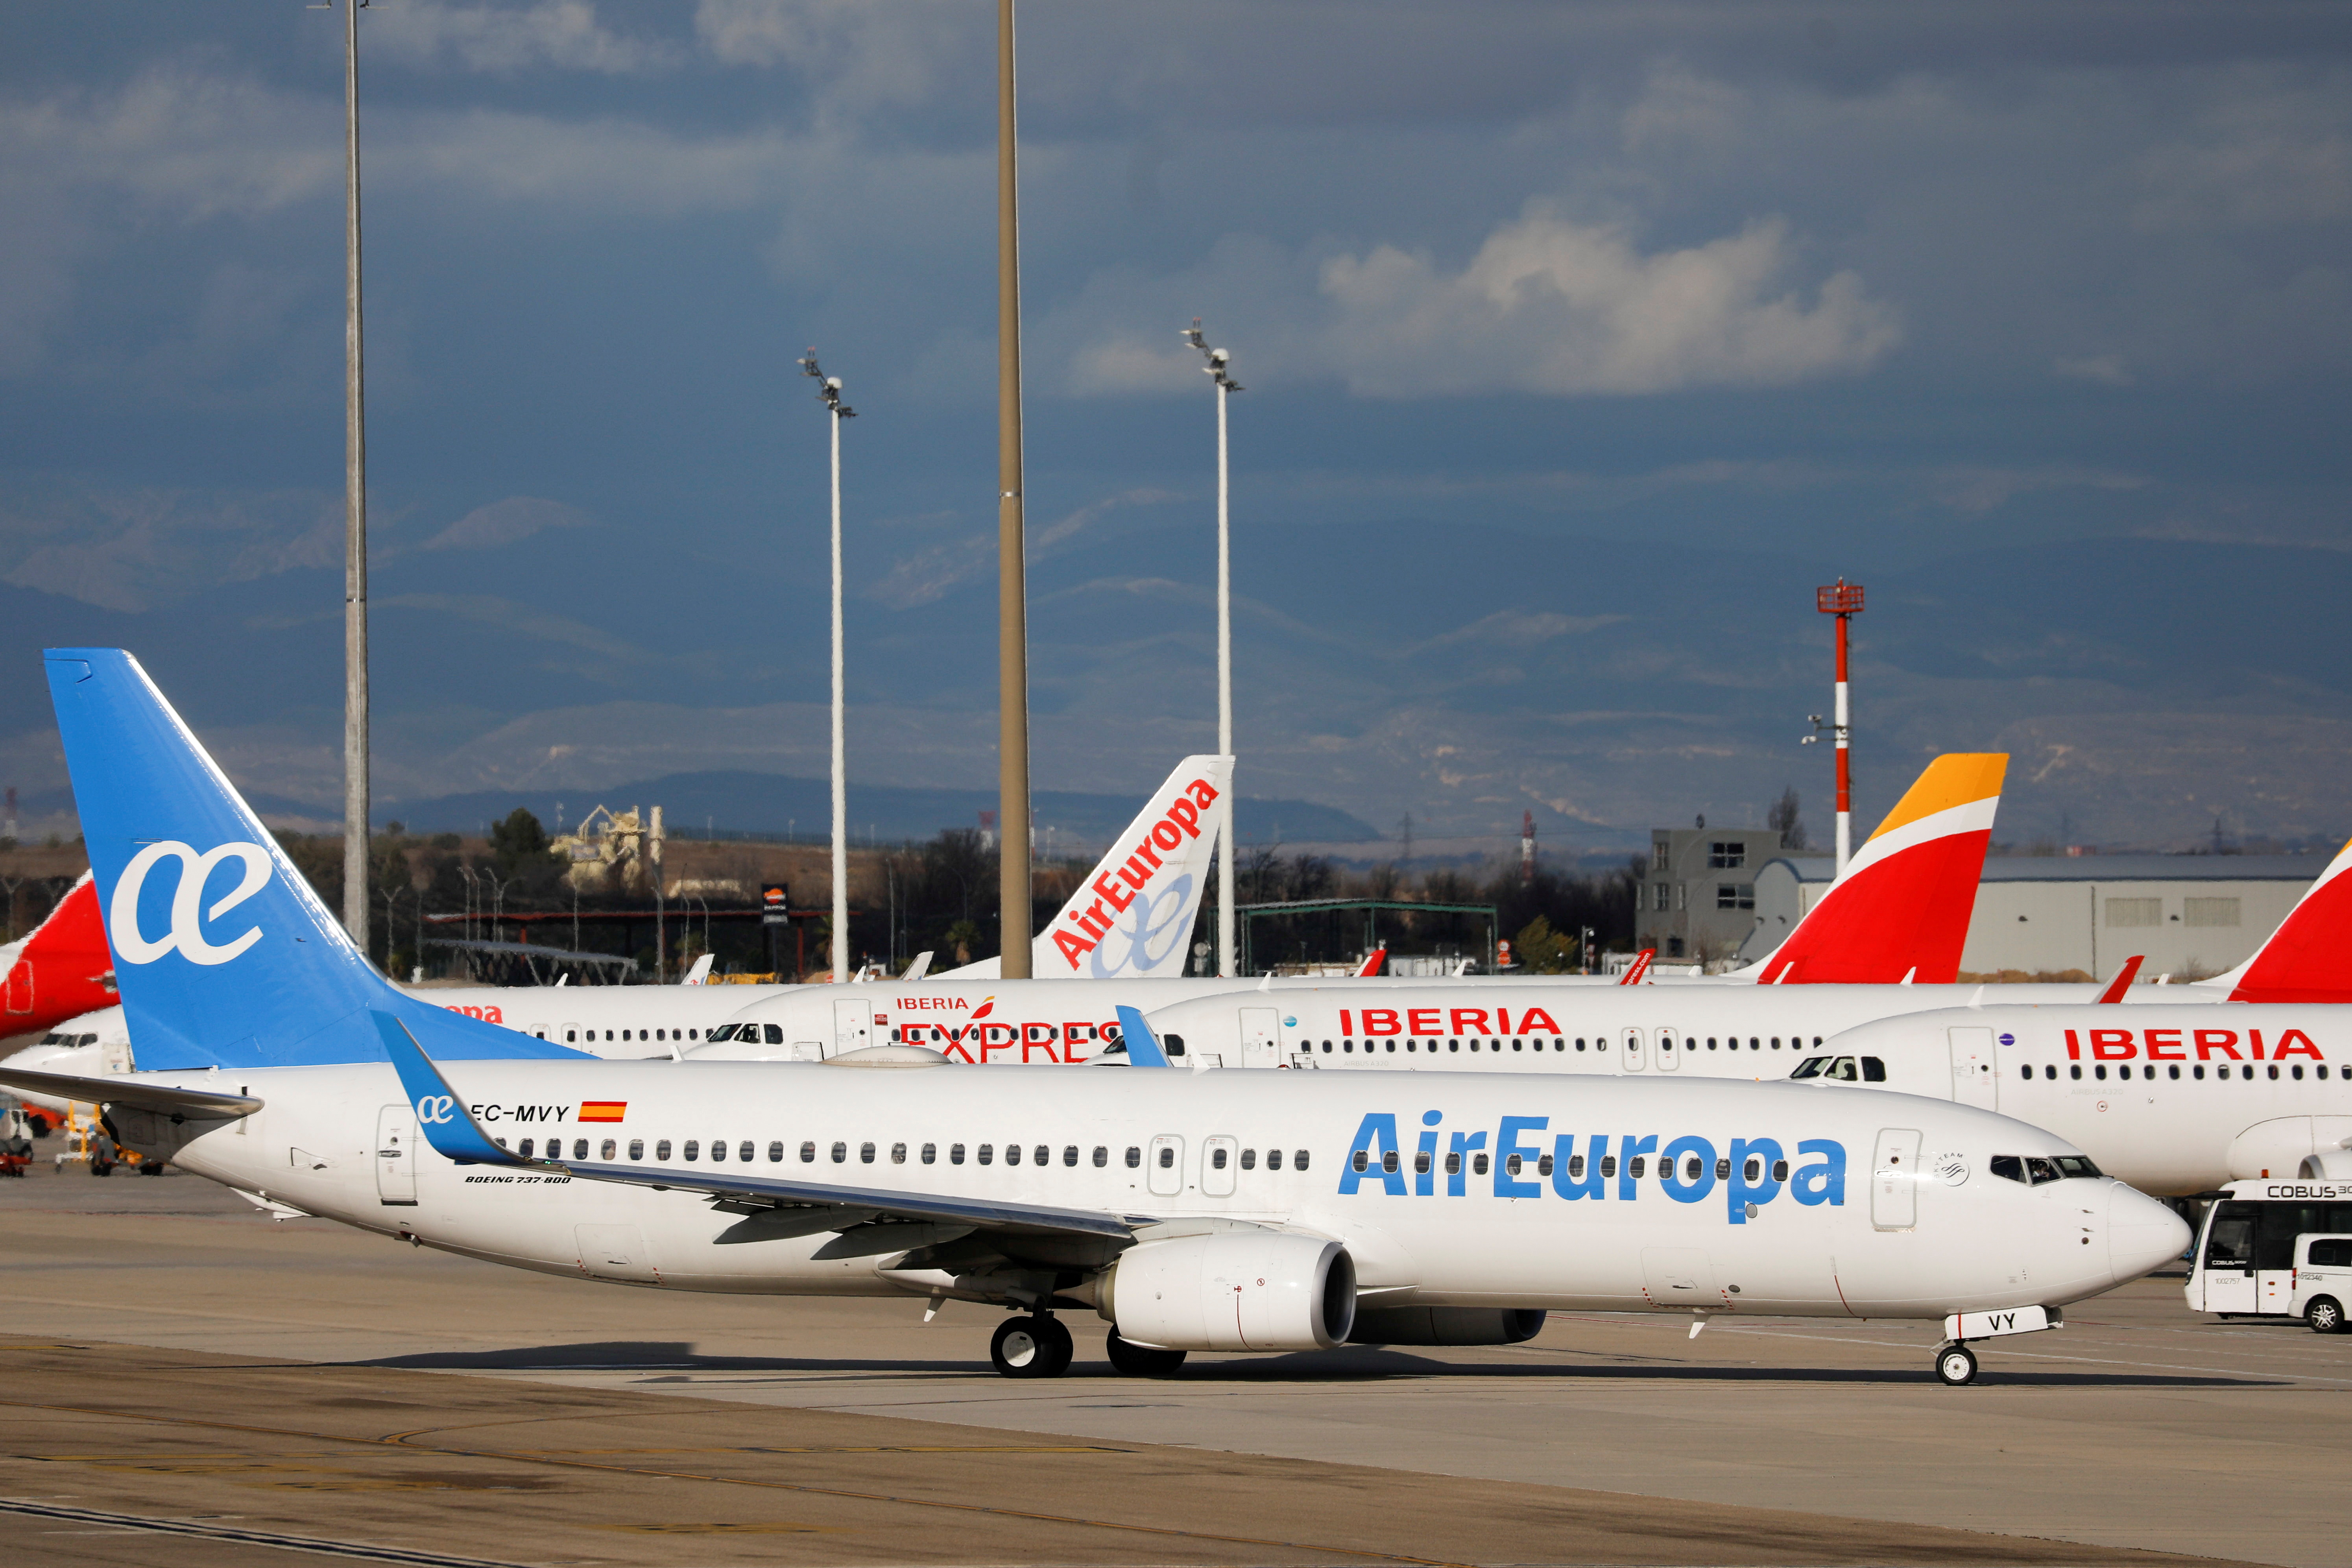 Iberia and Air Europa planes parked at Adolfo Suarez Barajas airport